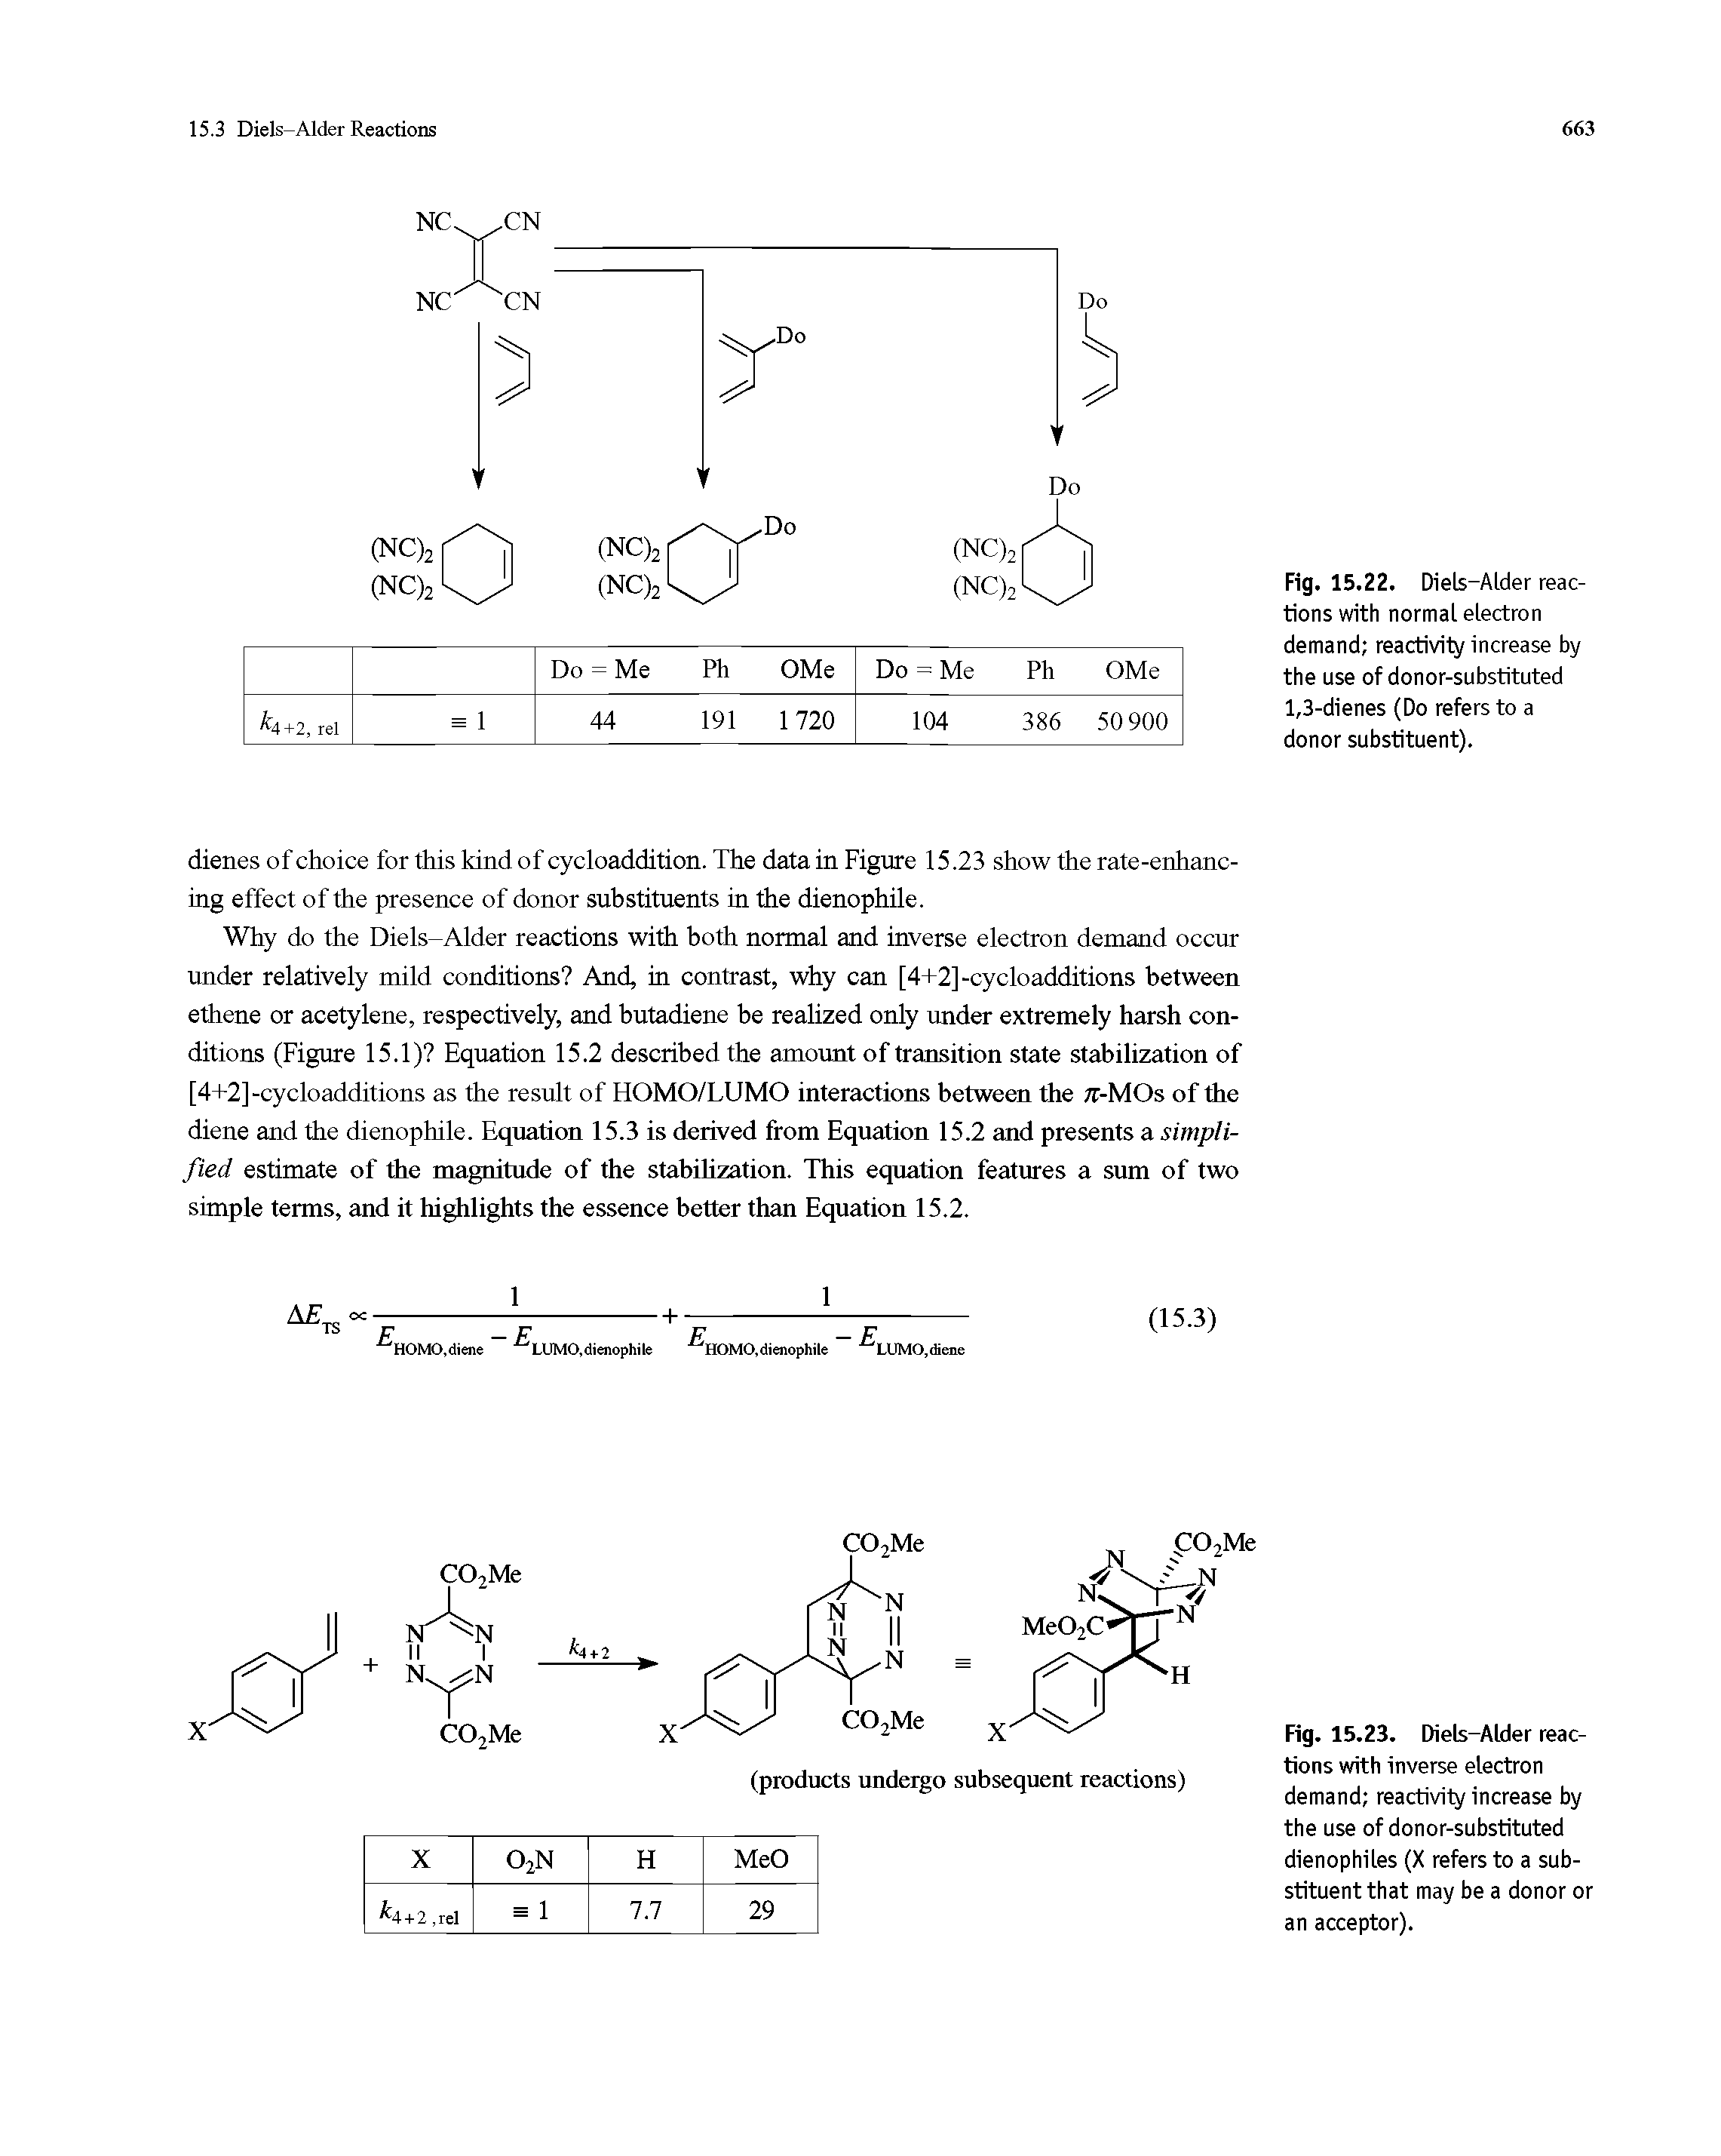 Fig. 15.23. Diels-Alder reactions with inverse electron demand reactivity increase by the use of donor-substituted dienophiles (X refers to a substituent that may be a donor or an acceptor).